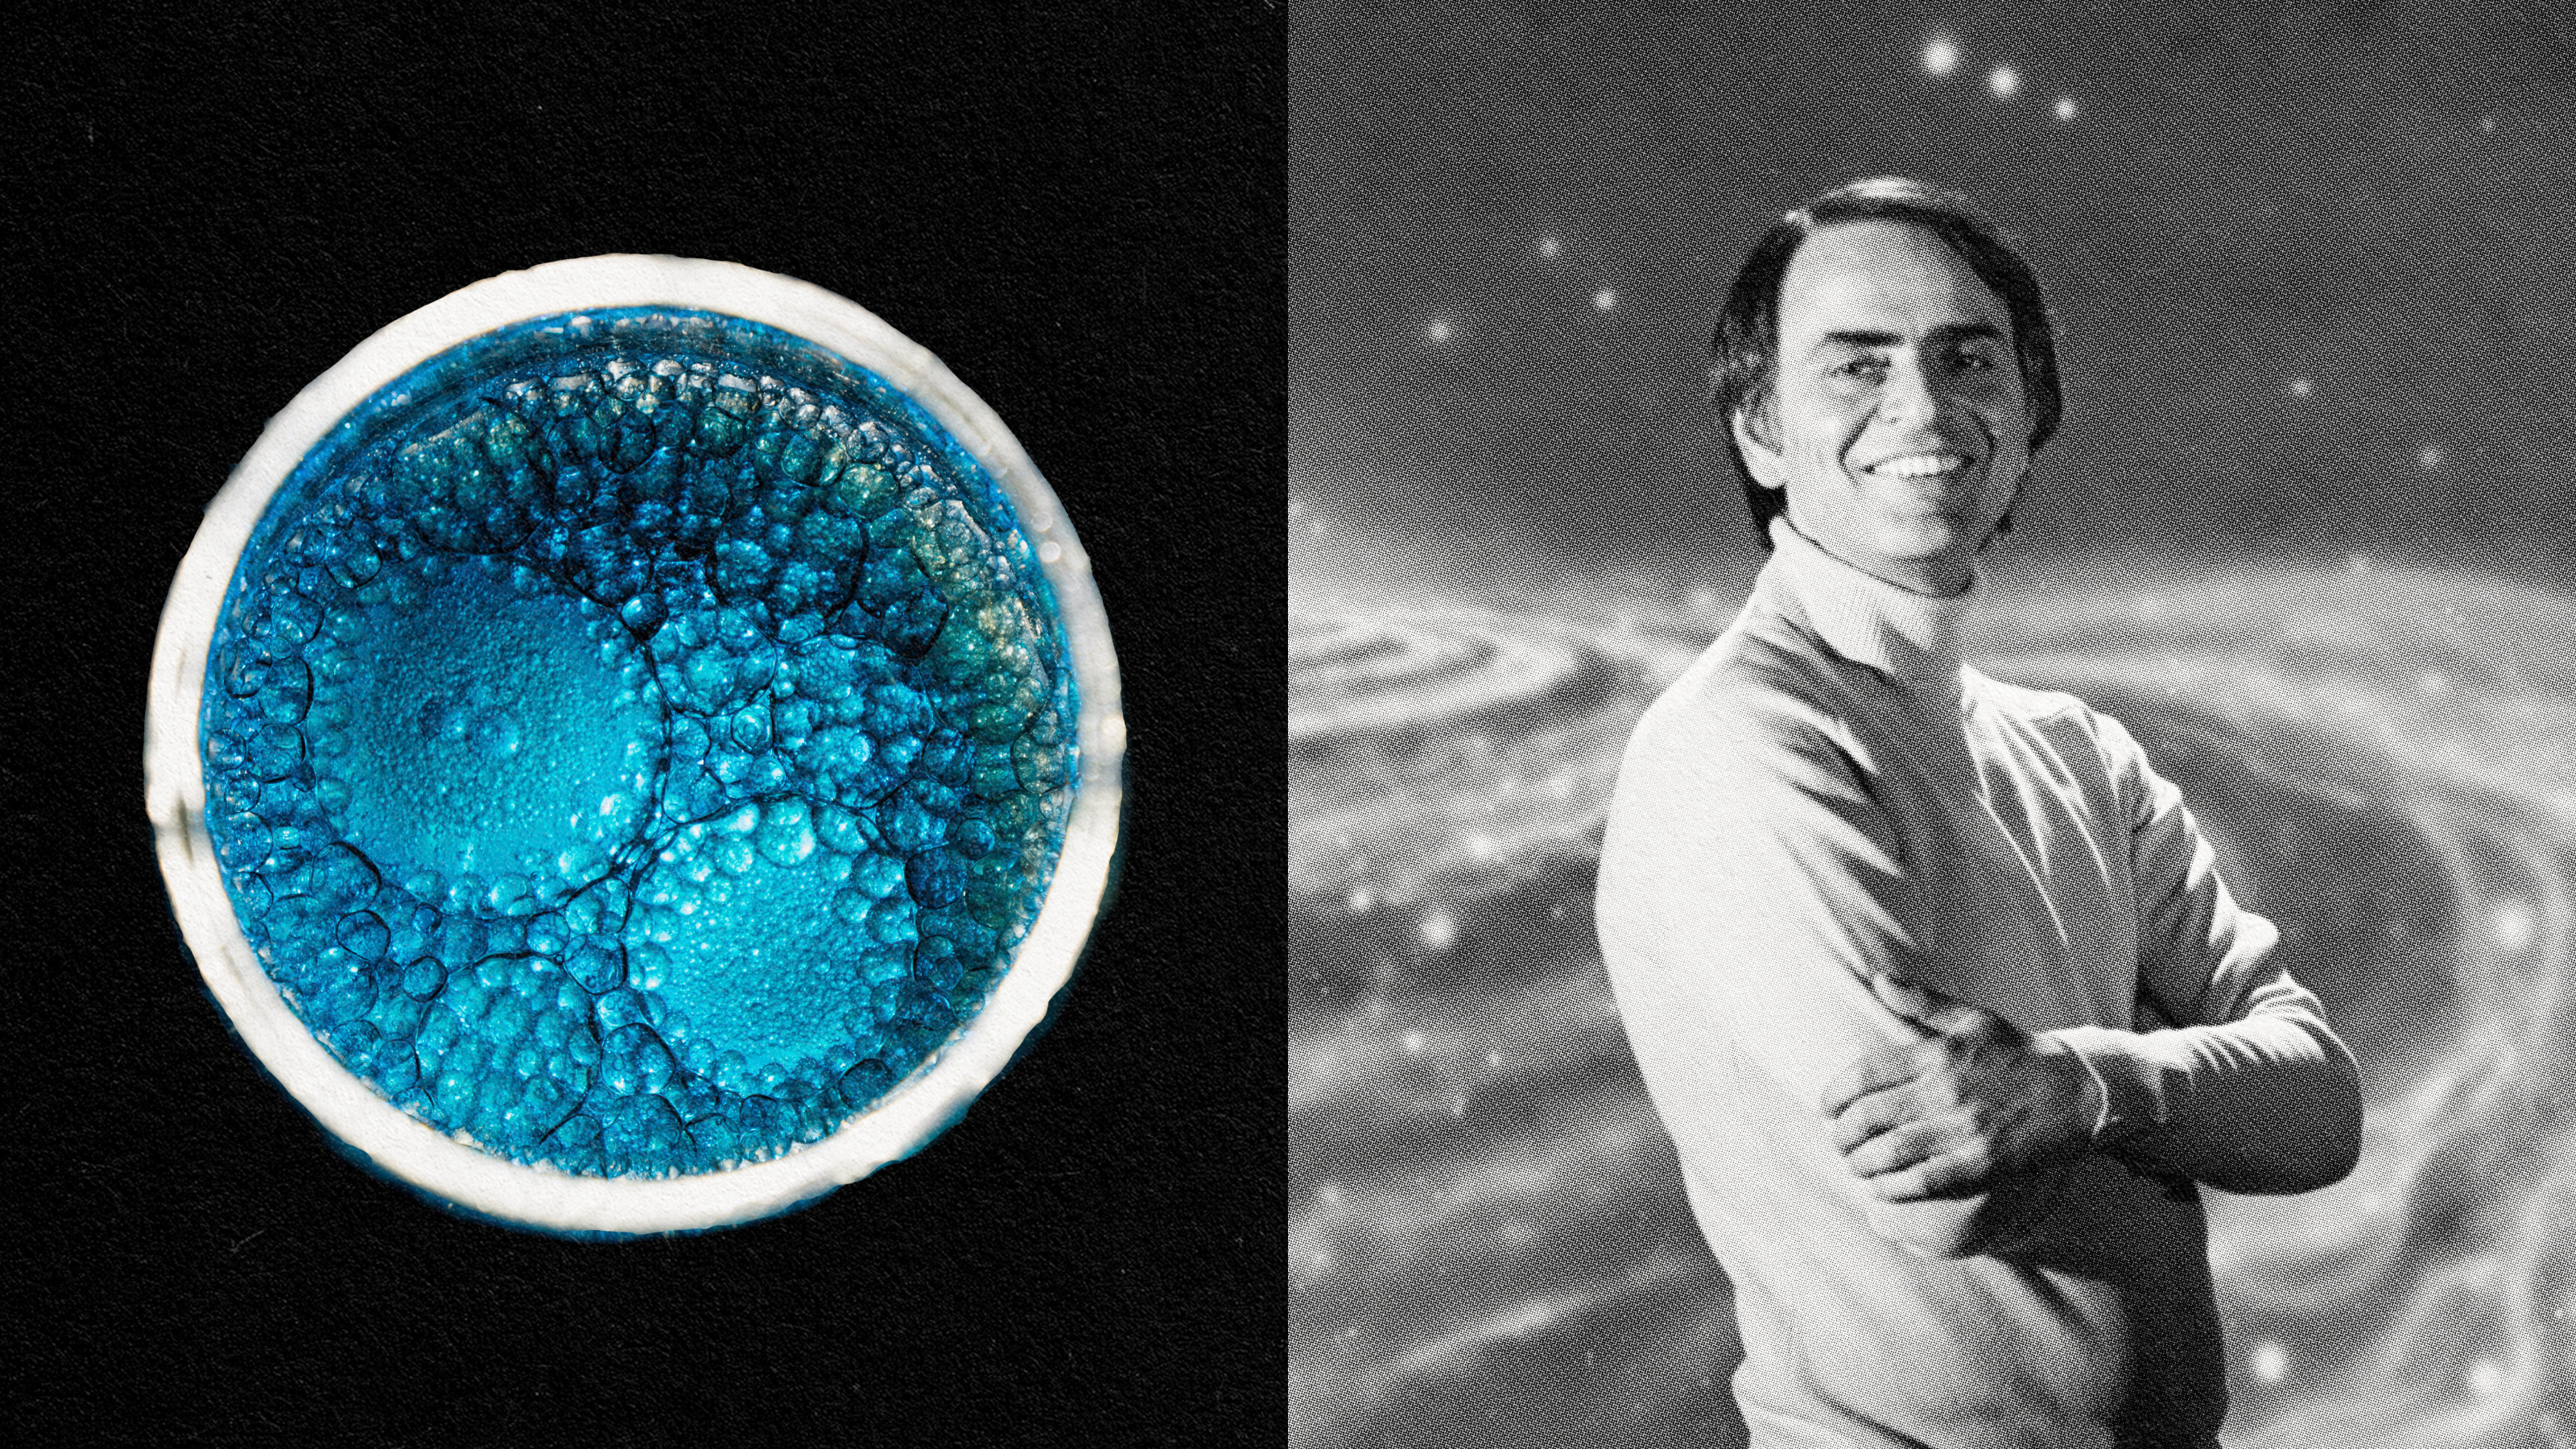 An image of a spiritually enlightened man posing with a celestial blue ball in tribute to Carl Sagan.